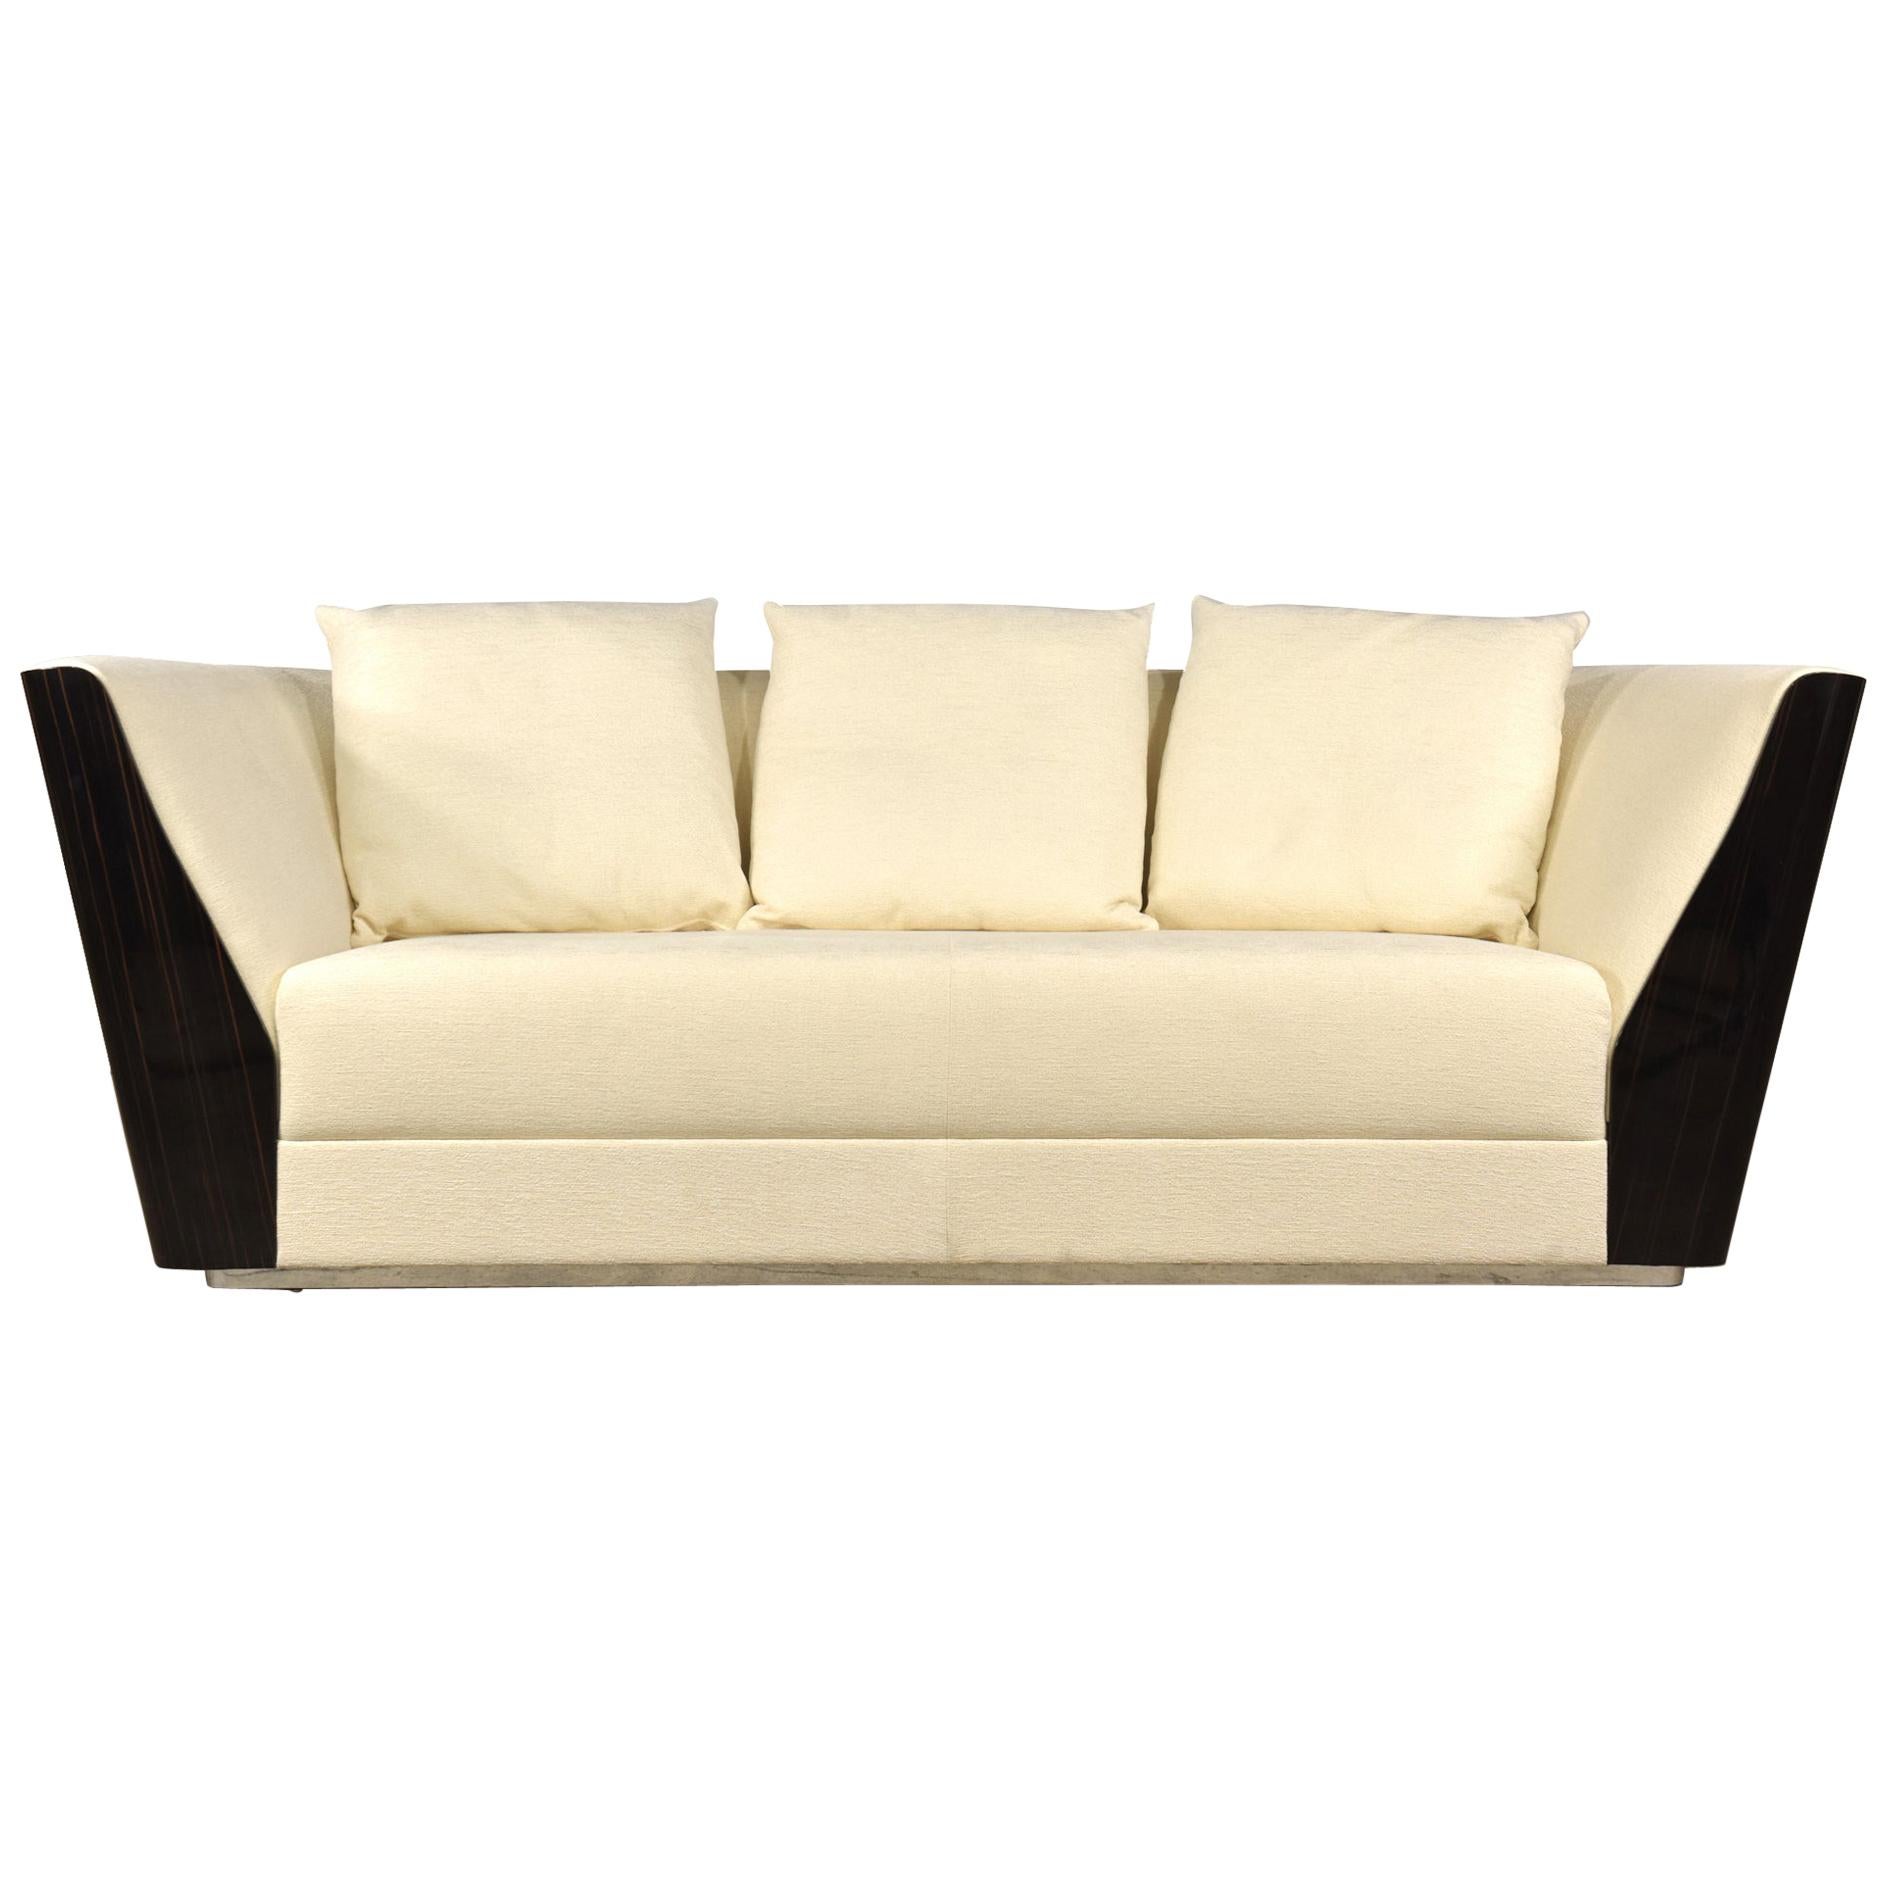 Heritage Collection Oasi 2-Seat Sofa